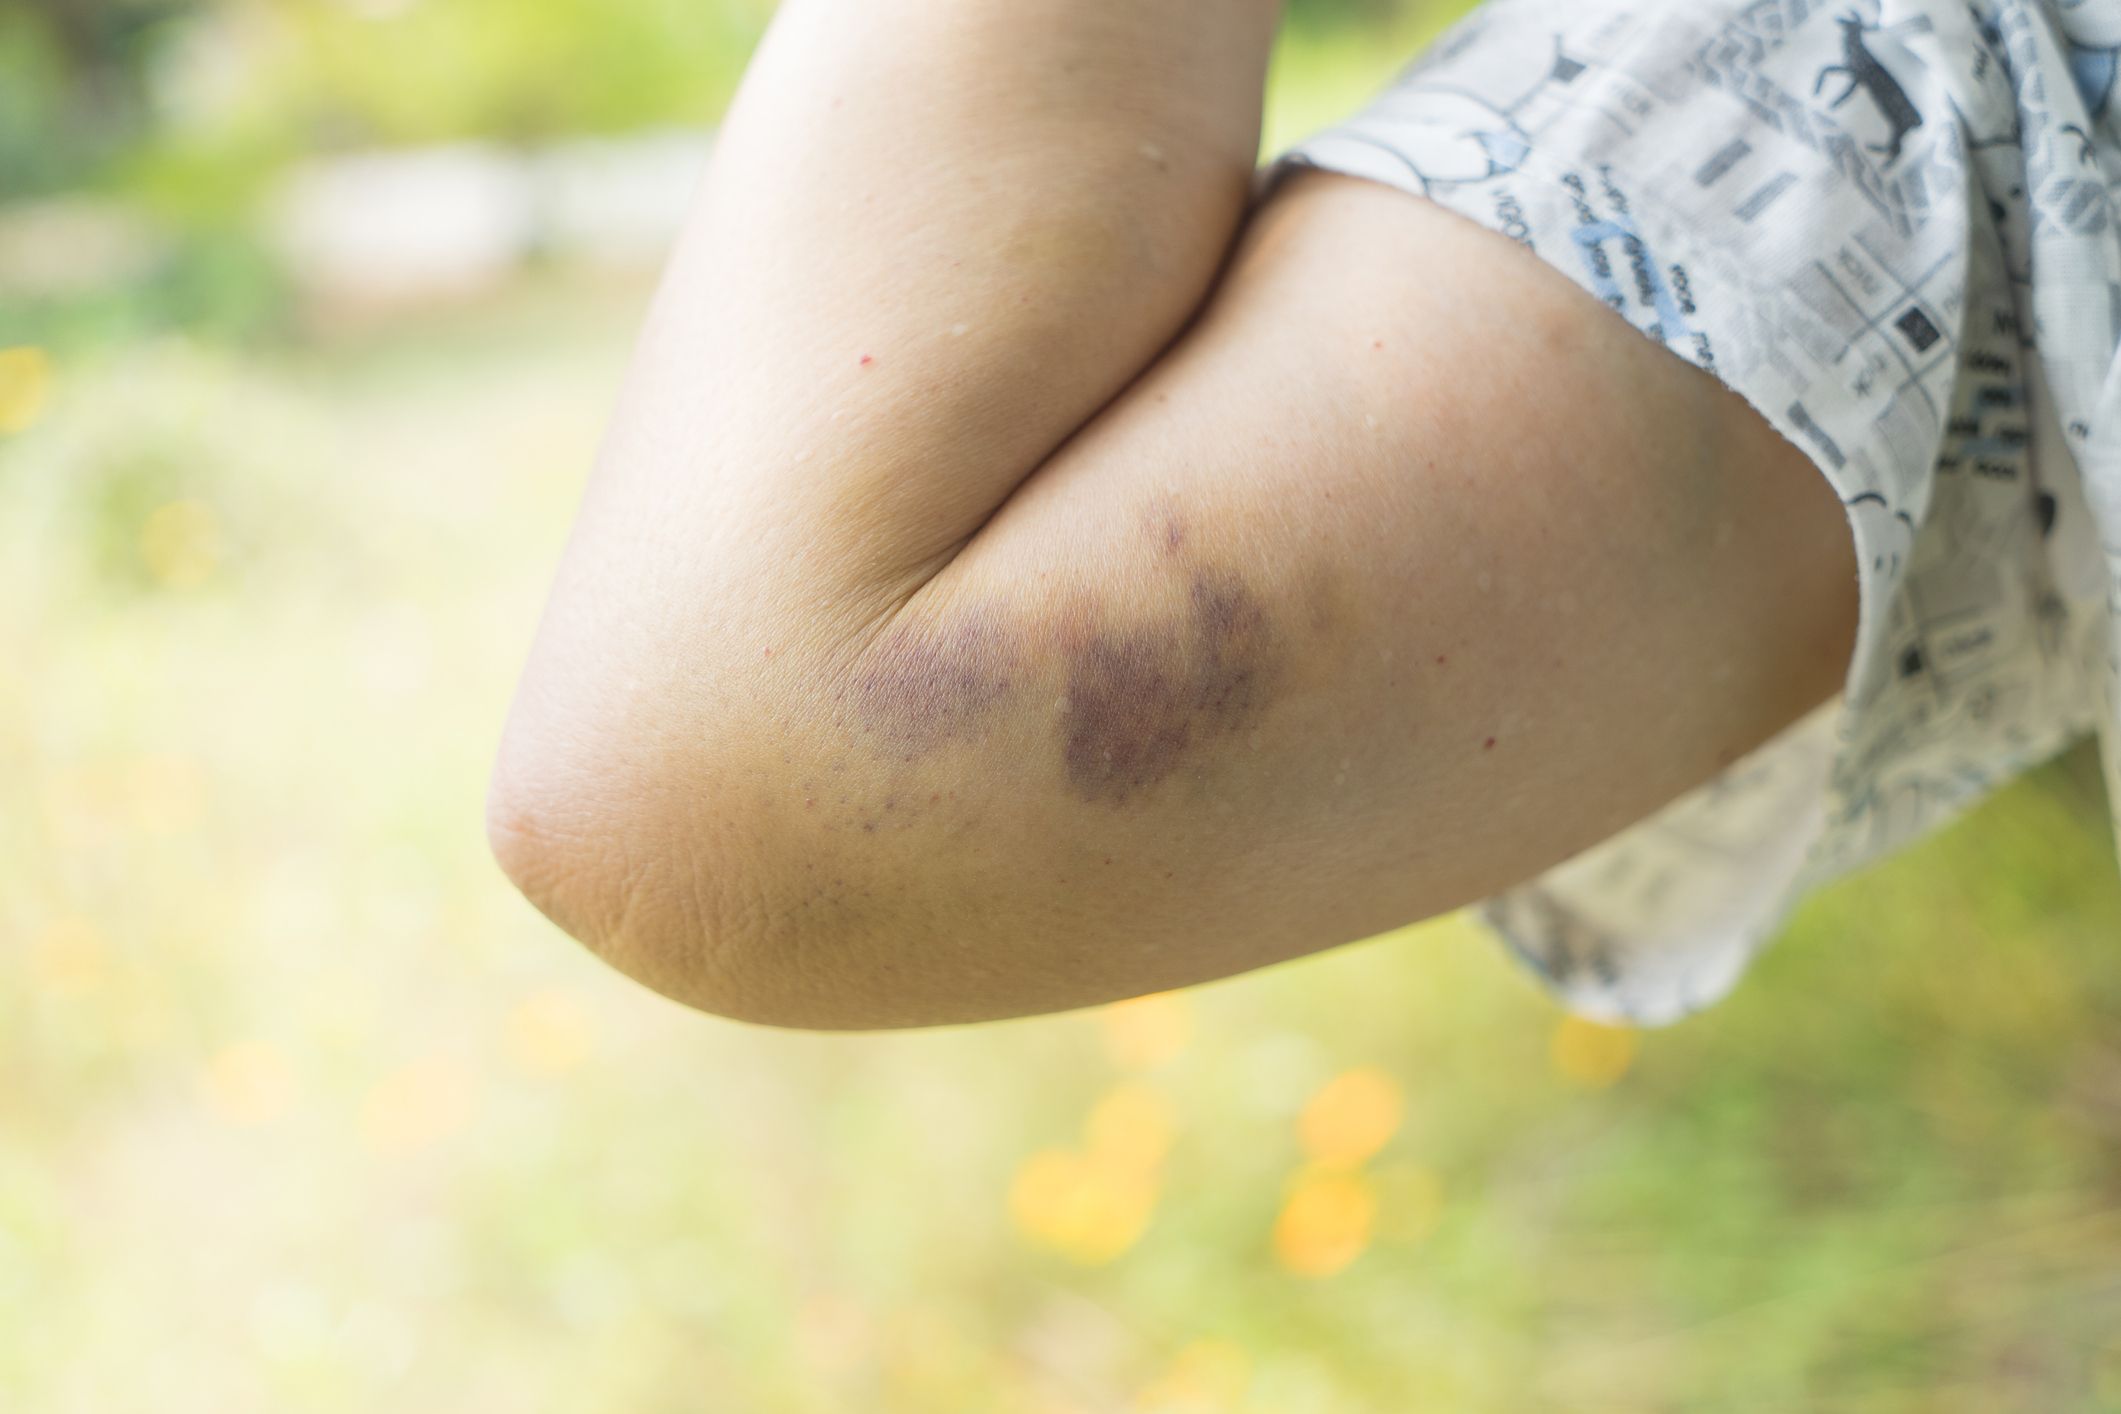 Close Up Bruising On The Old Woman Arm Woman Royalty Free Image 944987776 1562787481 